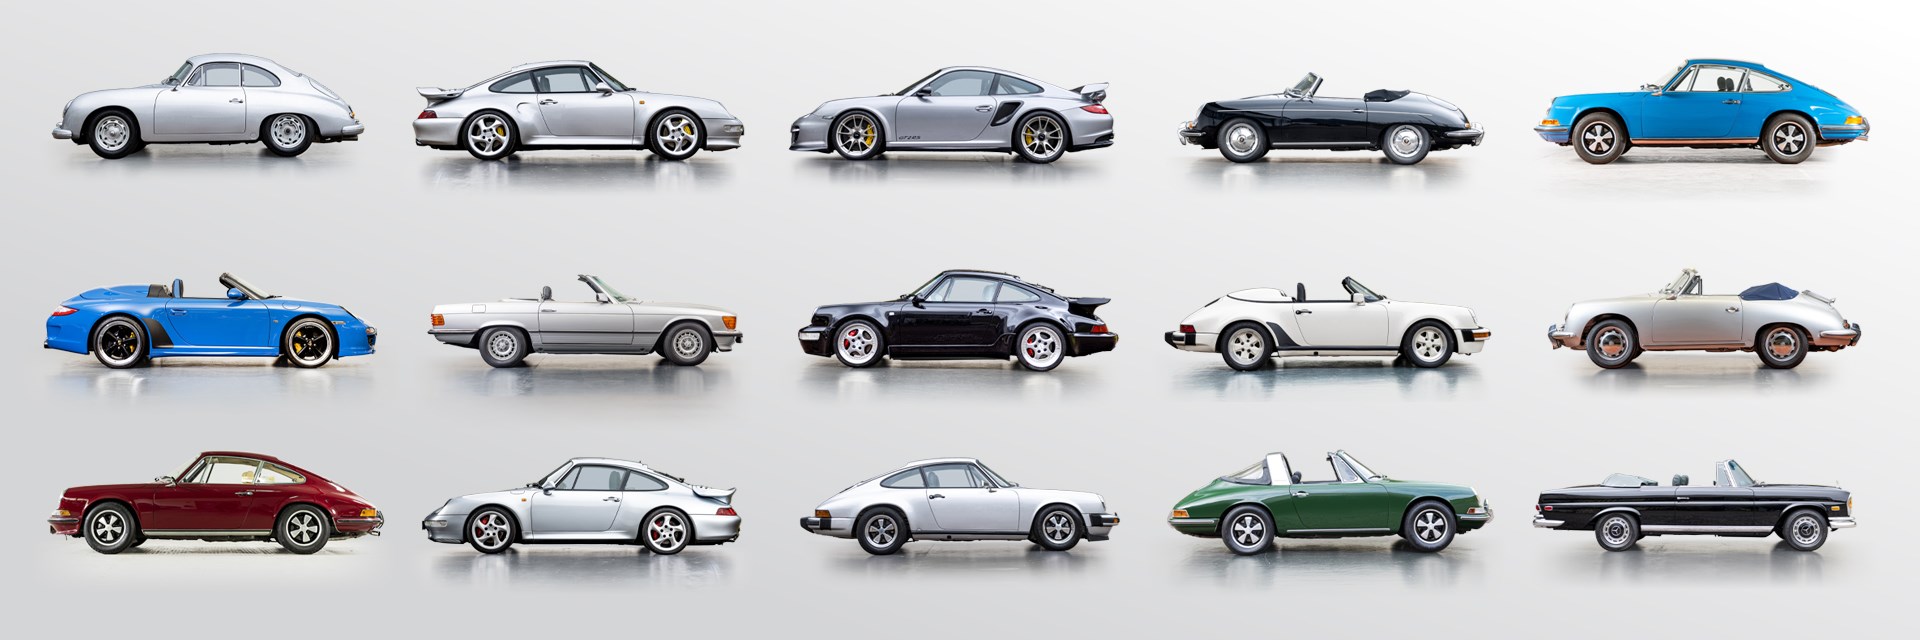 RM Sotheby's Carrera Collection Sale - Part Two